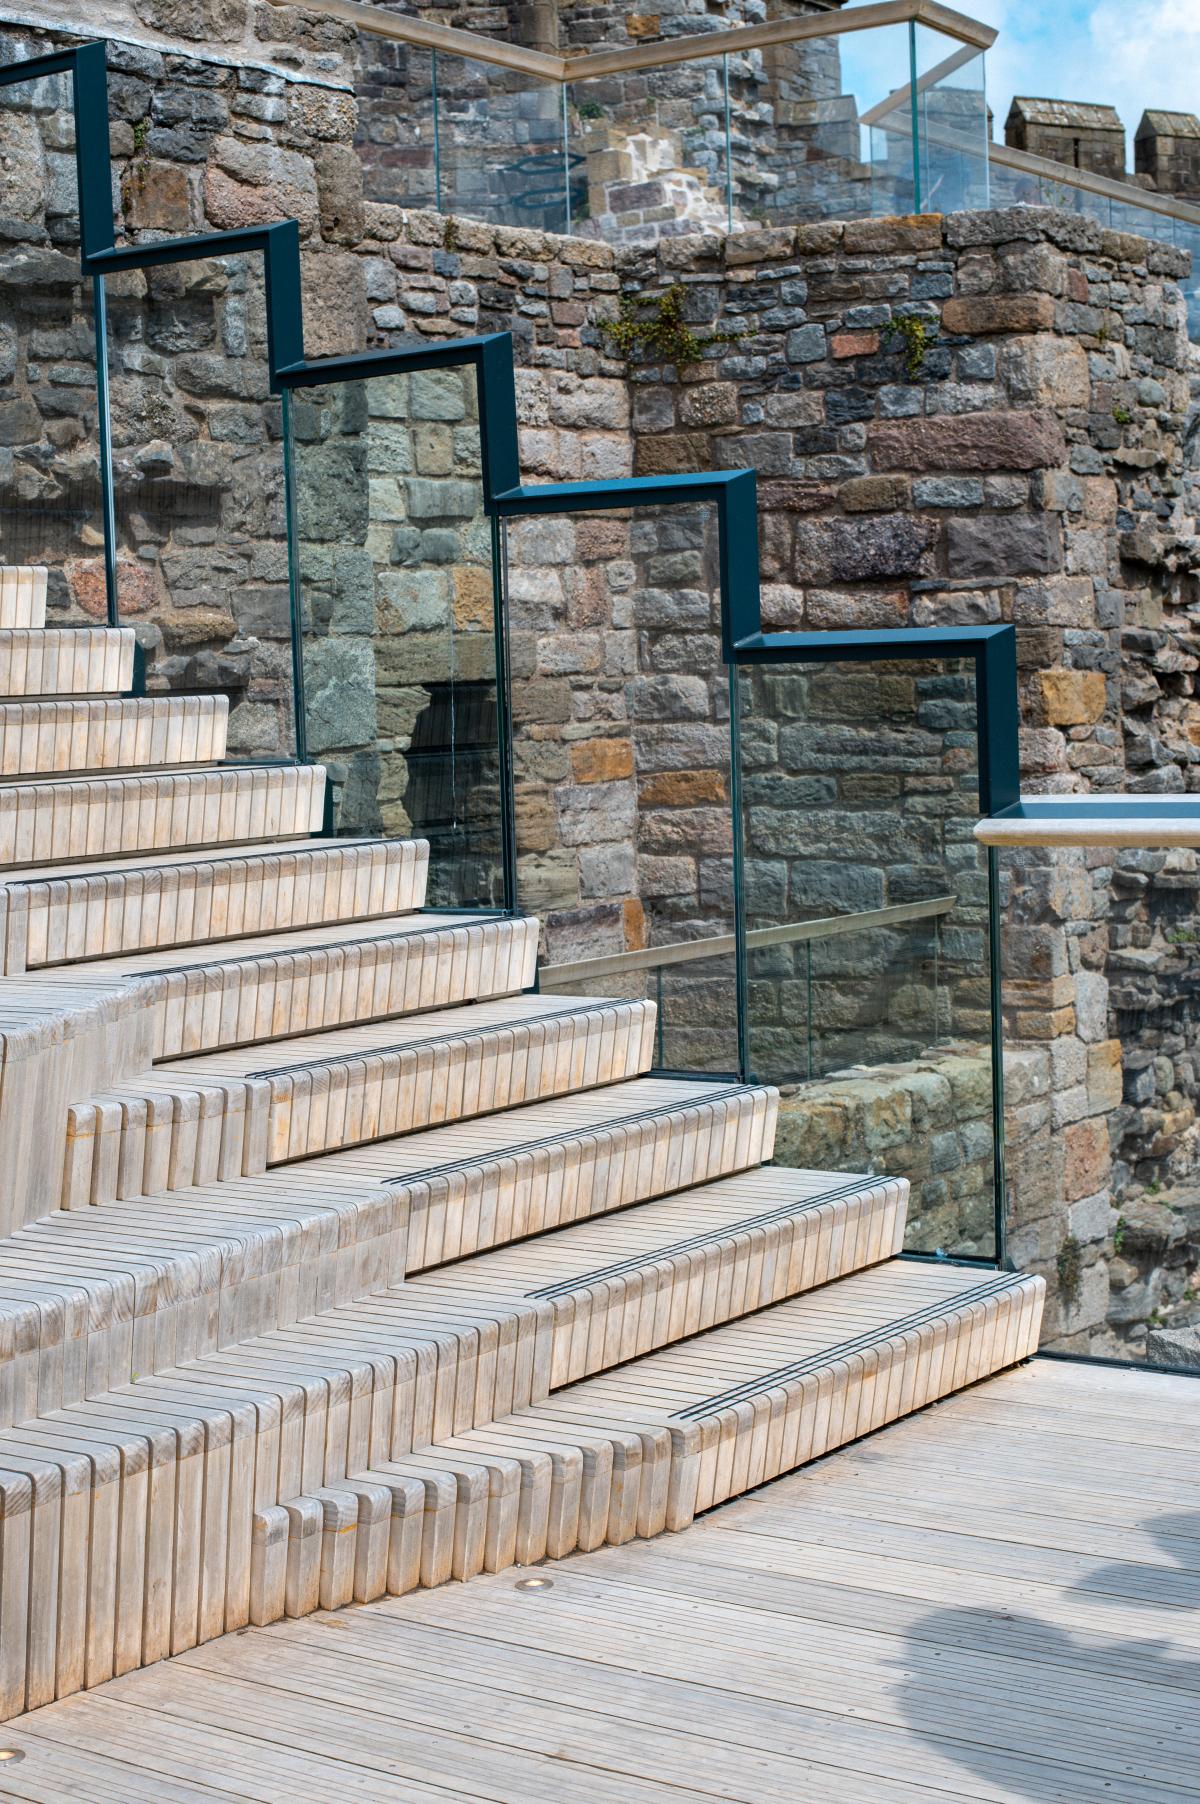 The timber steps at Caernarfon Castle with the glass balustrade and handrail.